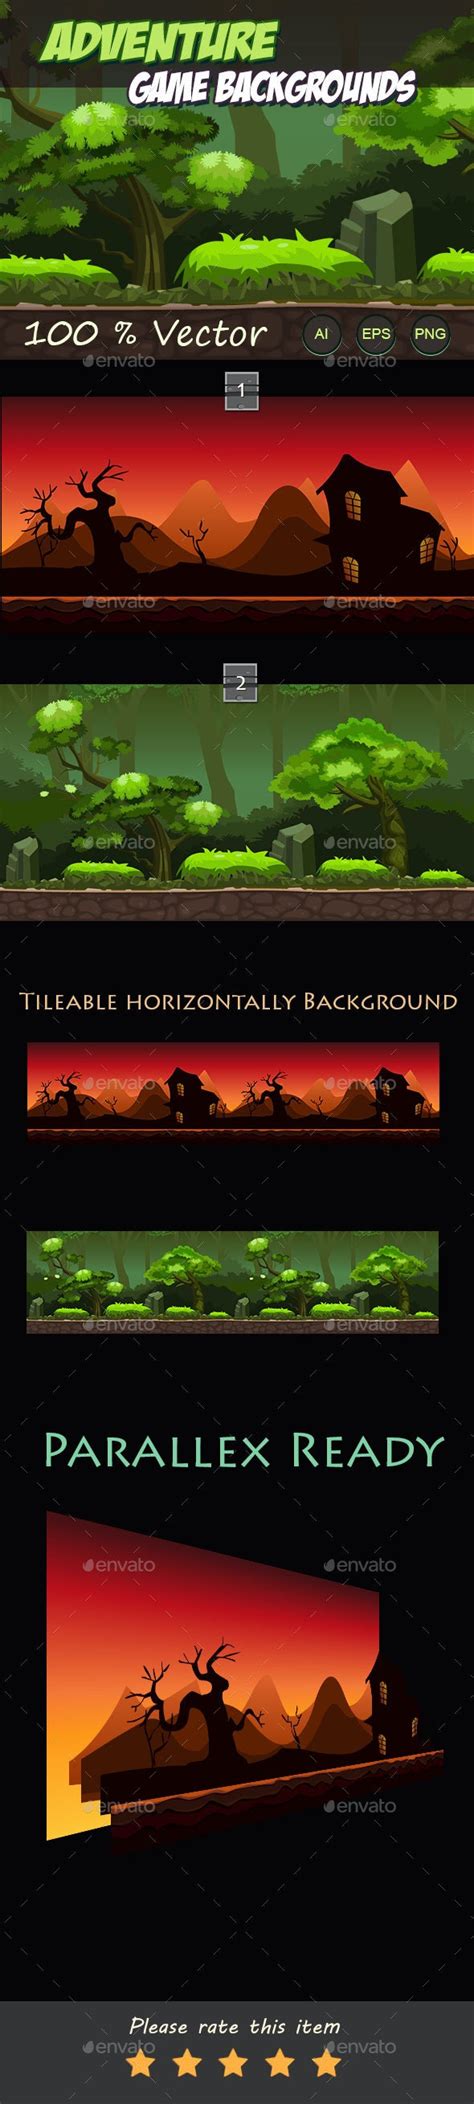 Adventure Game Backgrounds By Canvaskite Graphicriver